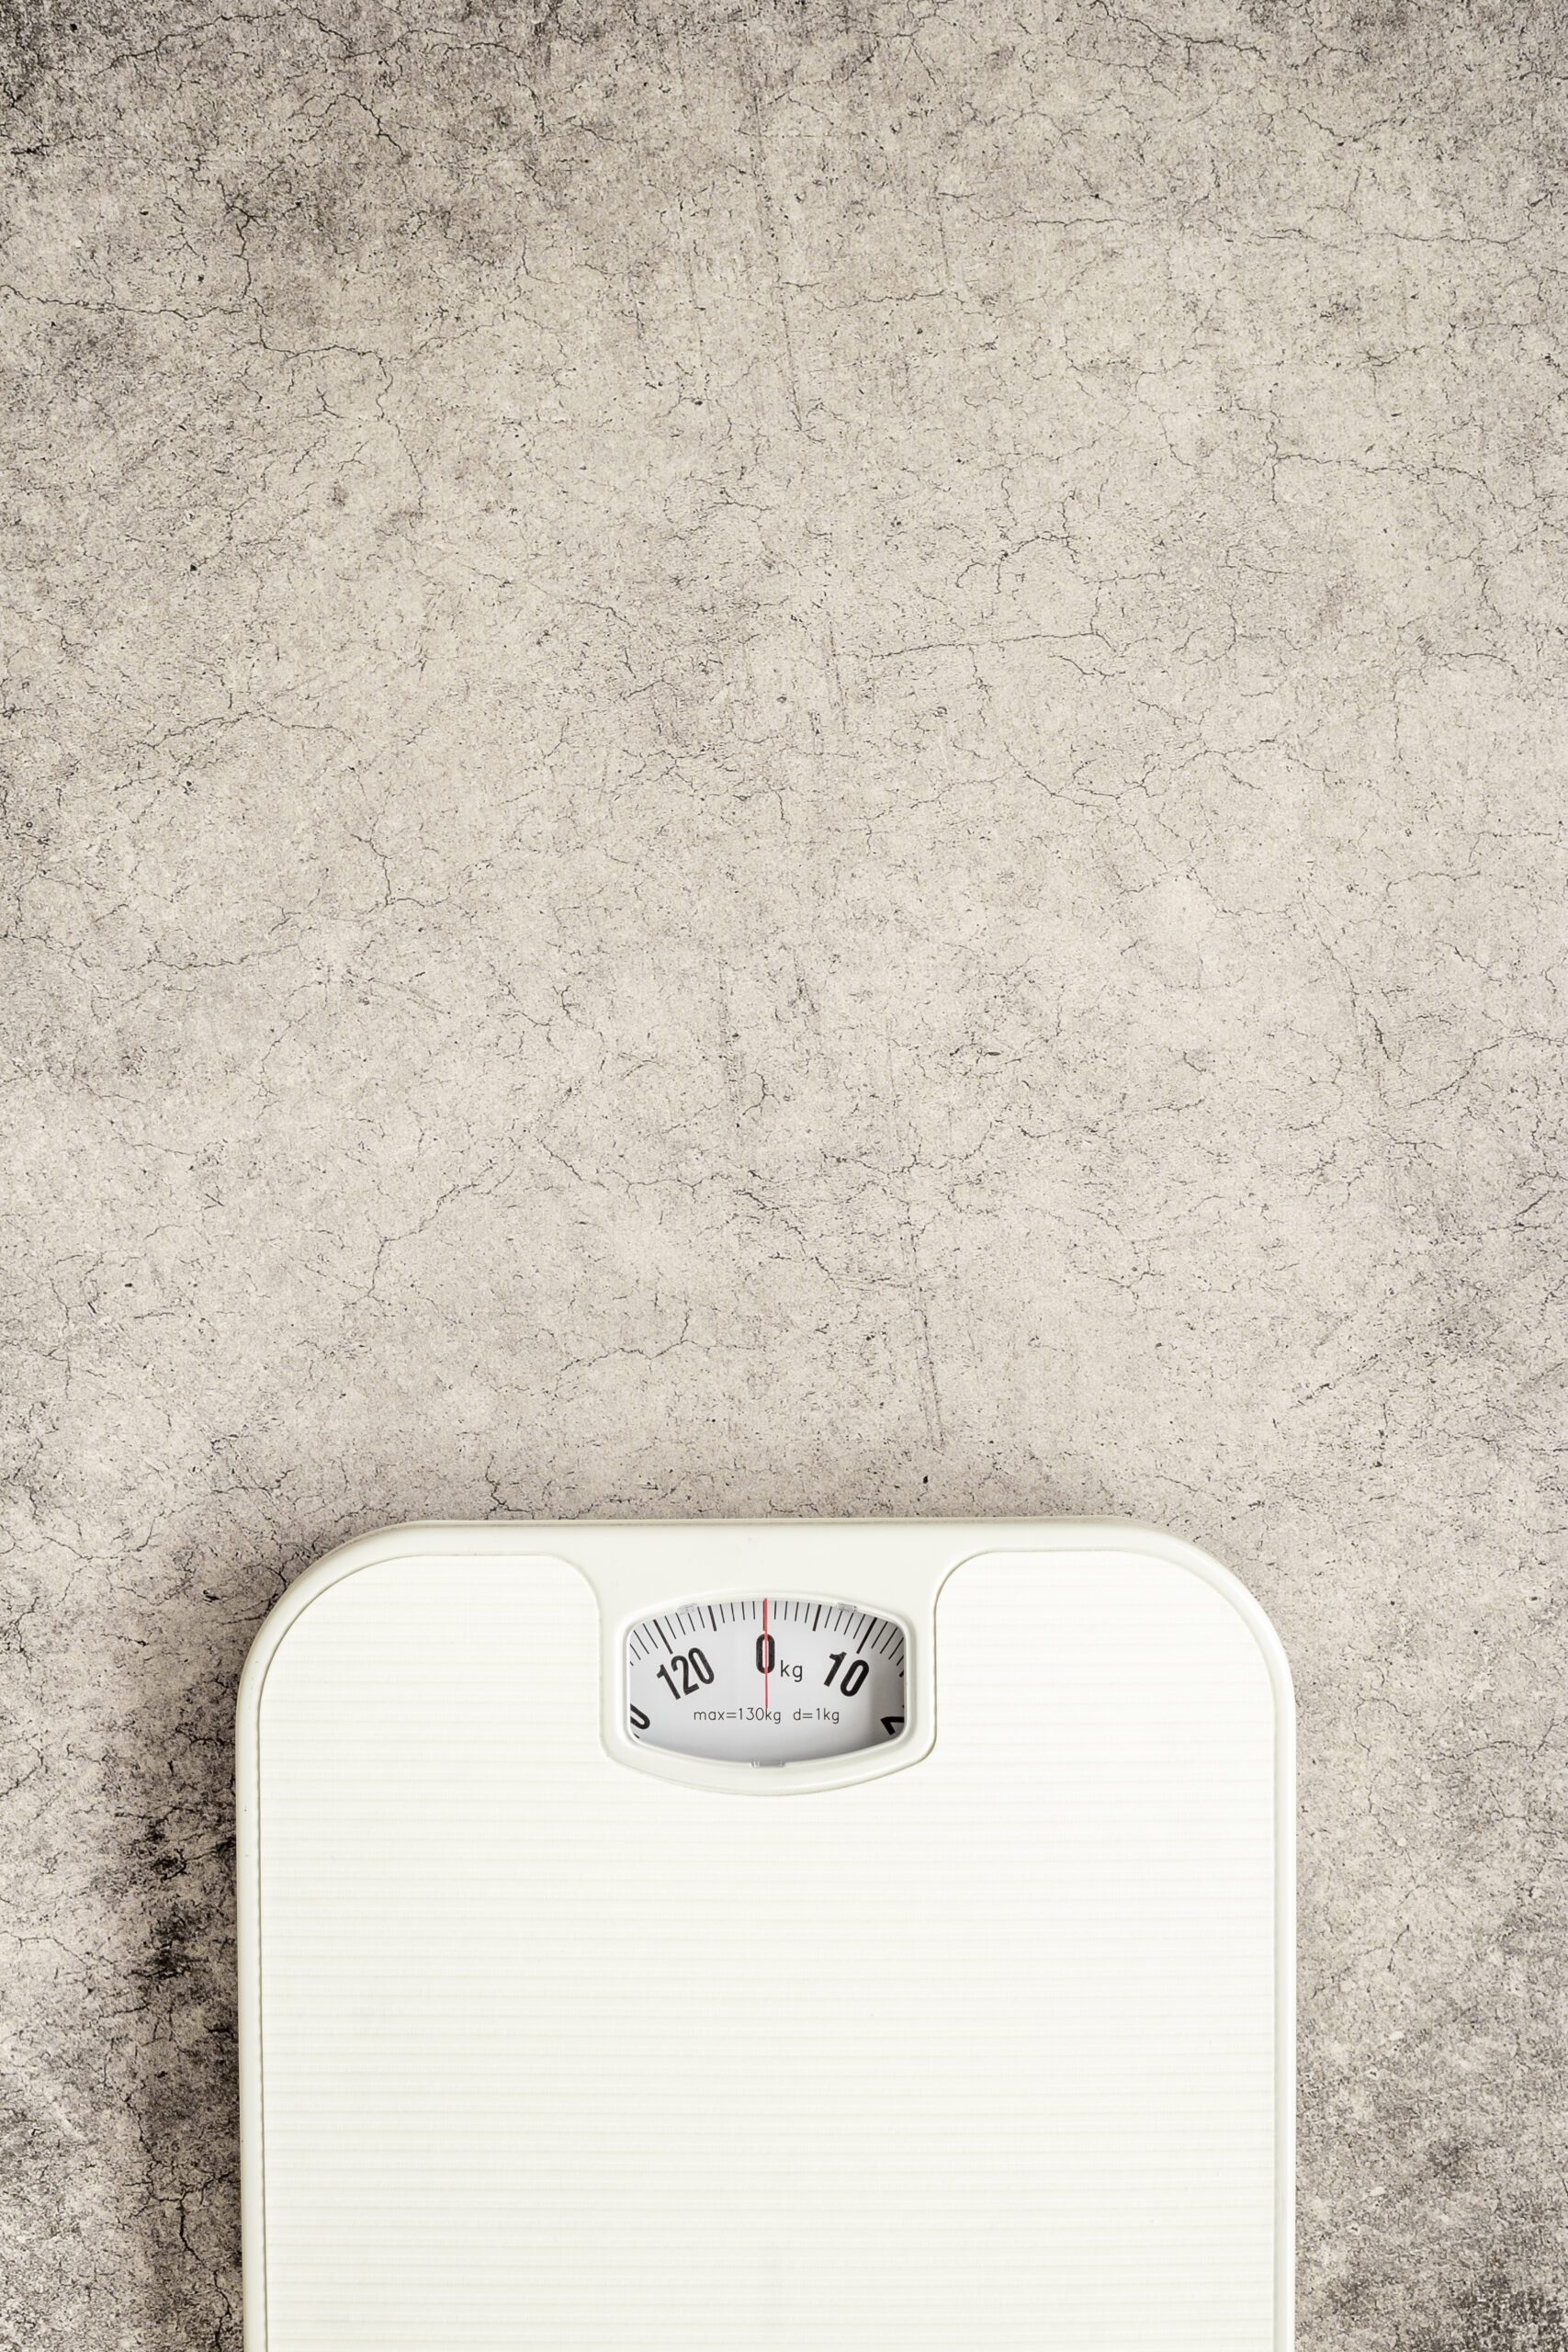 White weight scales on the floor. Weight measurement and loss concept.